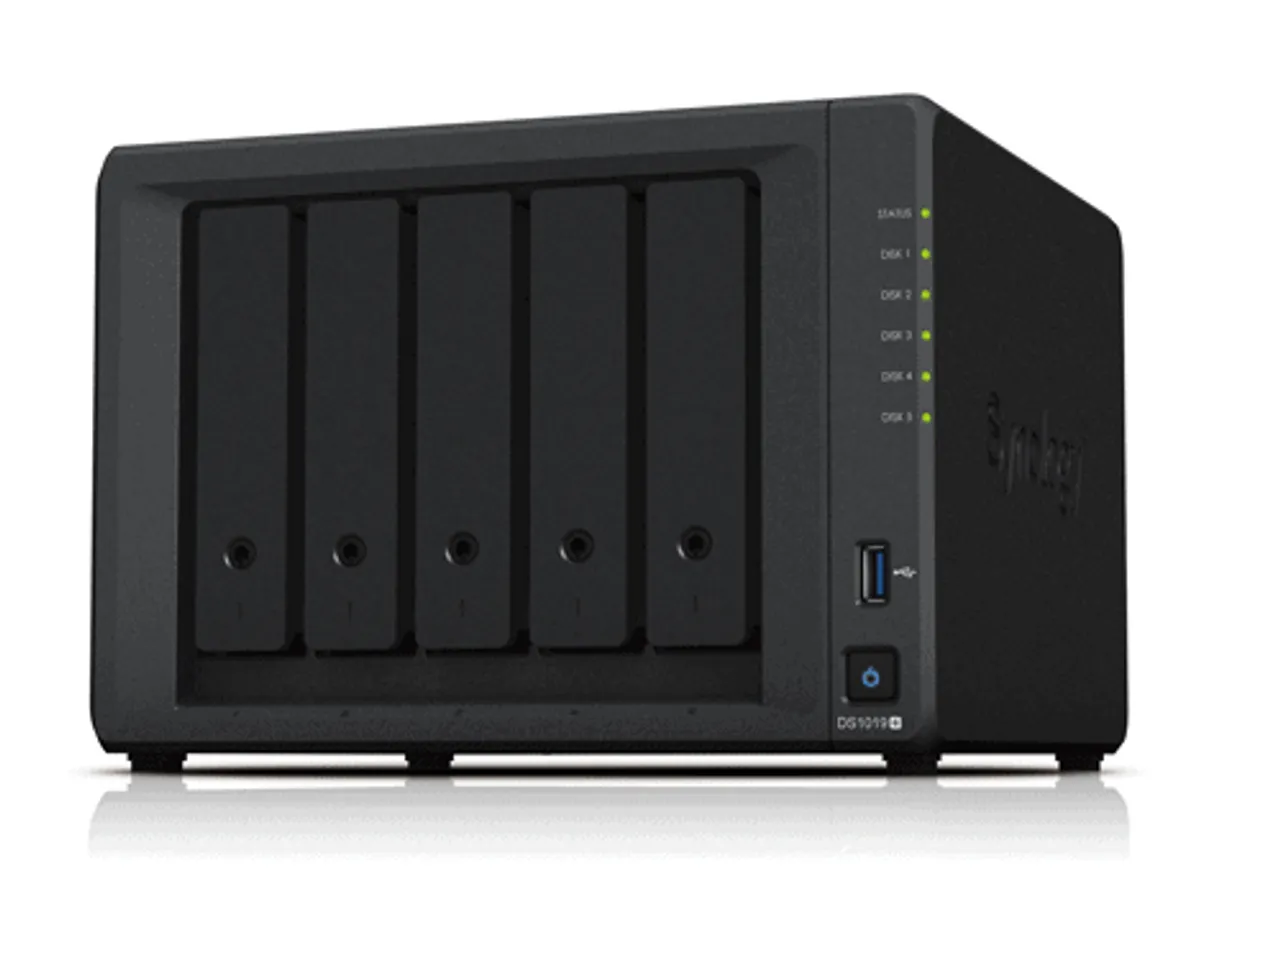 SYNOLOGY Launches DiskStation DS1019+, for Small Offices and IT Enthusiasts